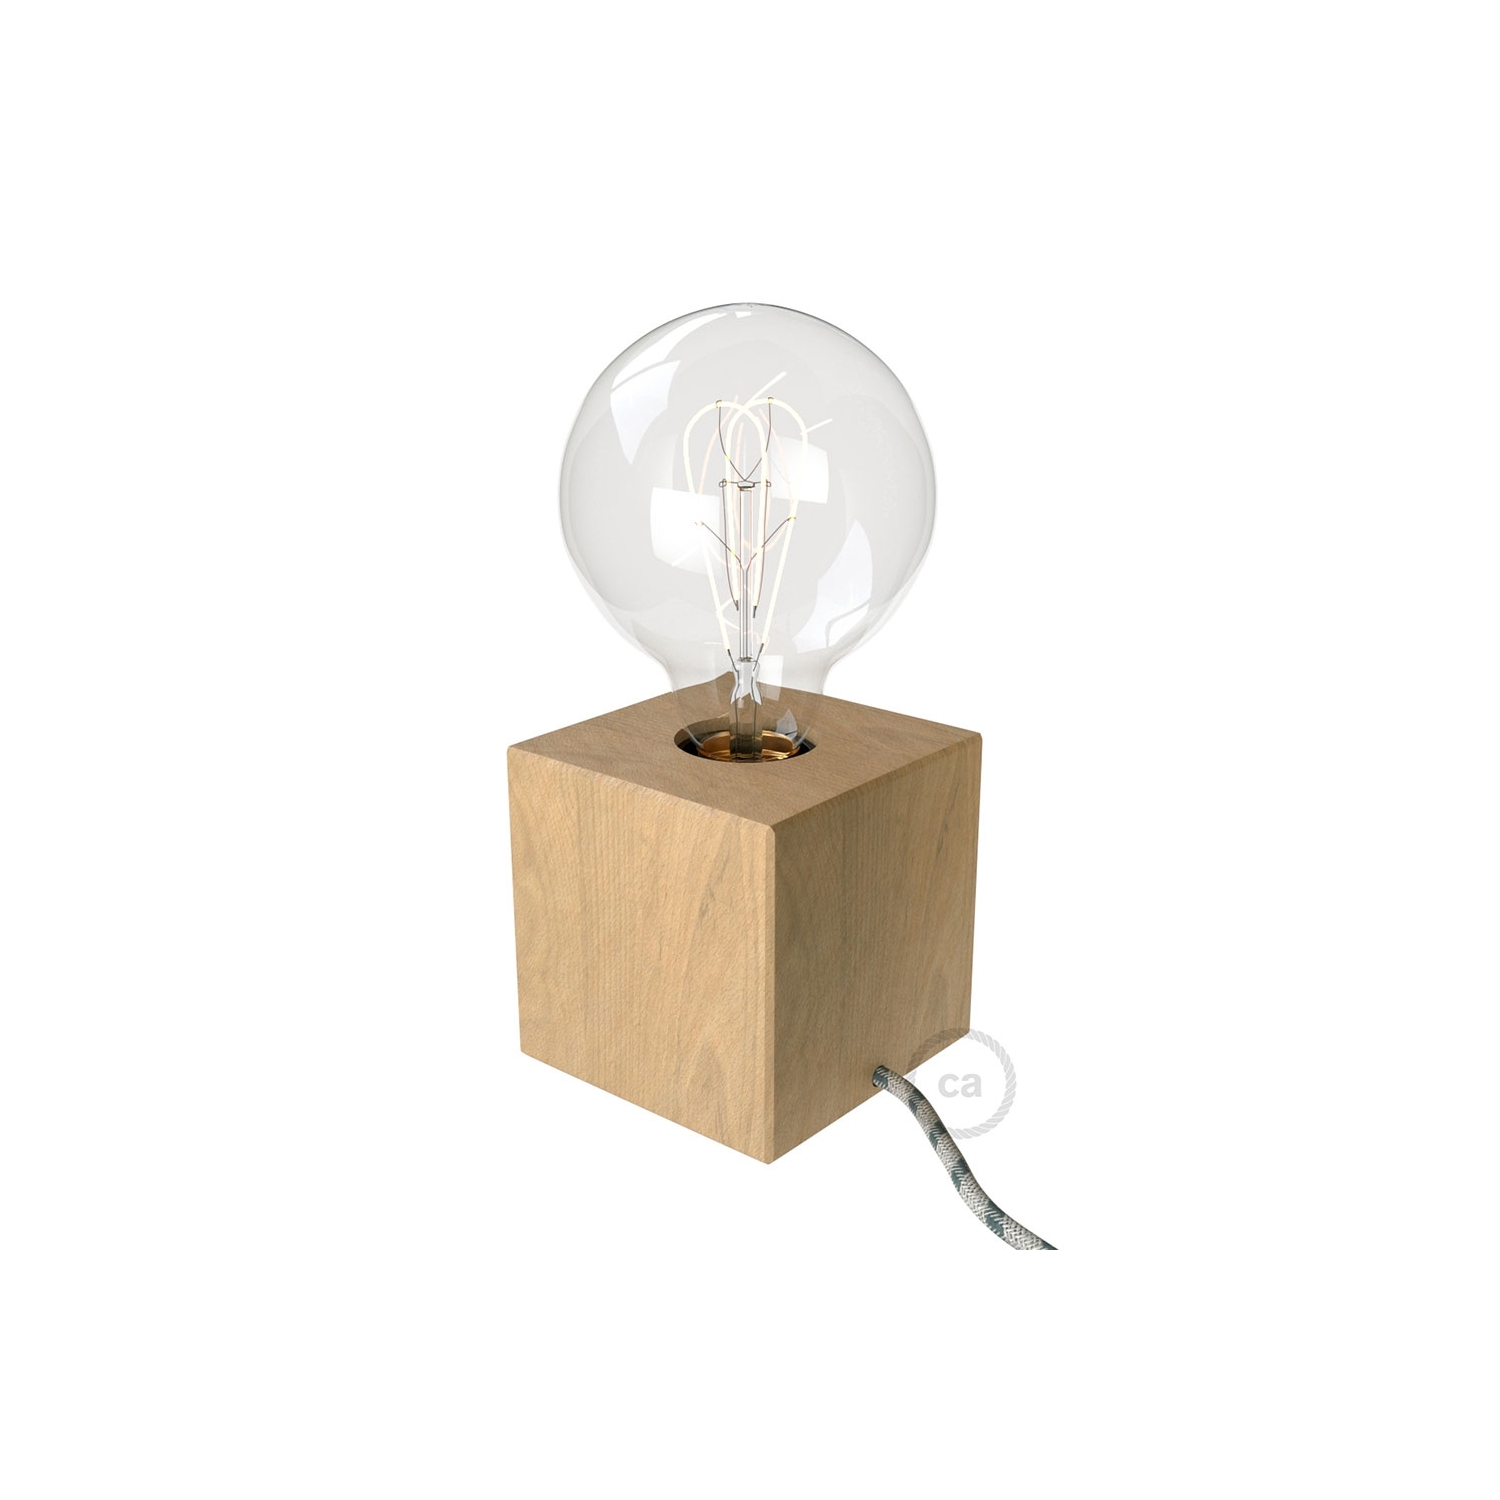 The Posaluce Cubetto | Natural Wood Table Lamp